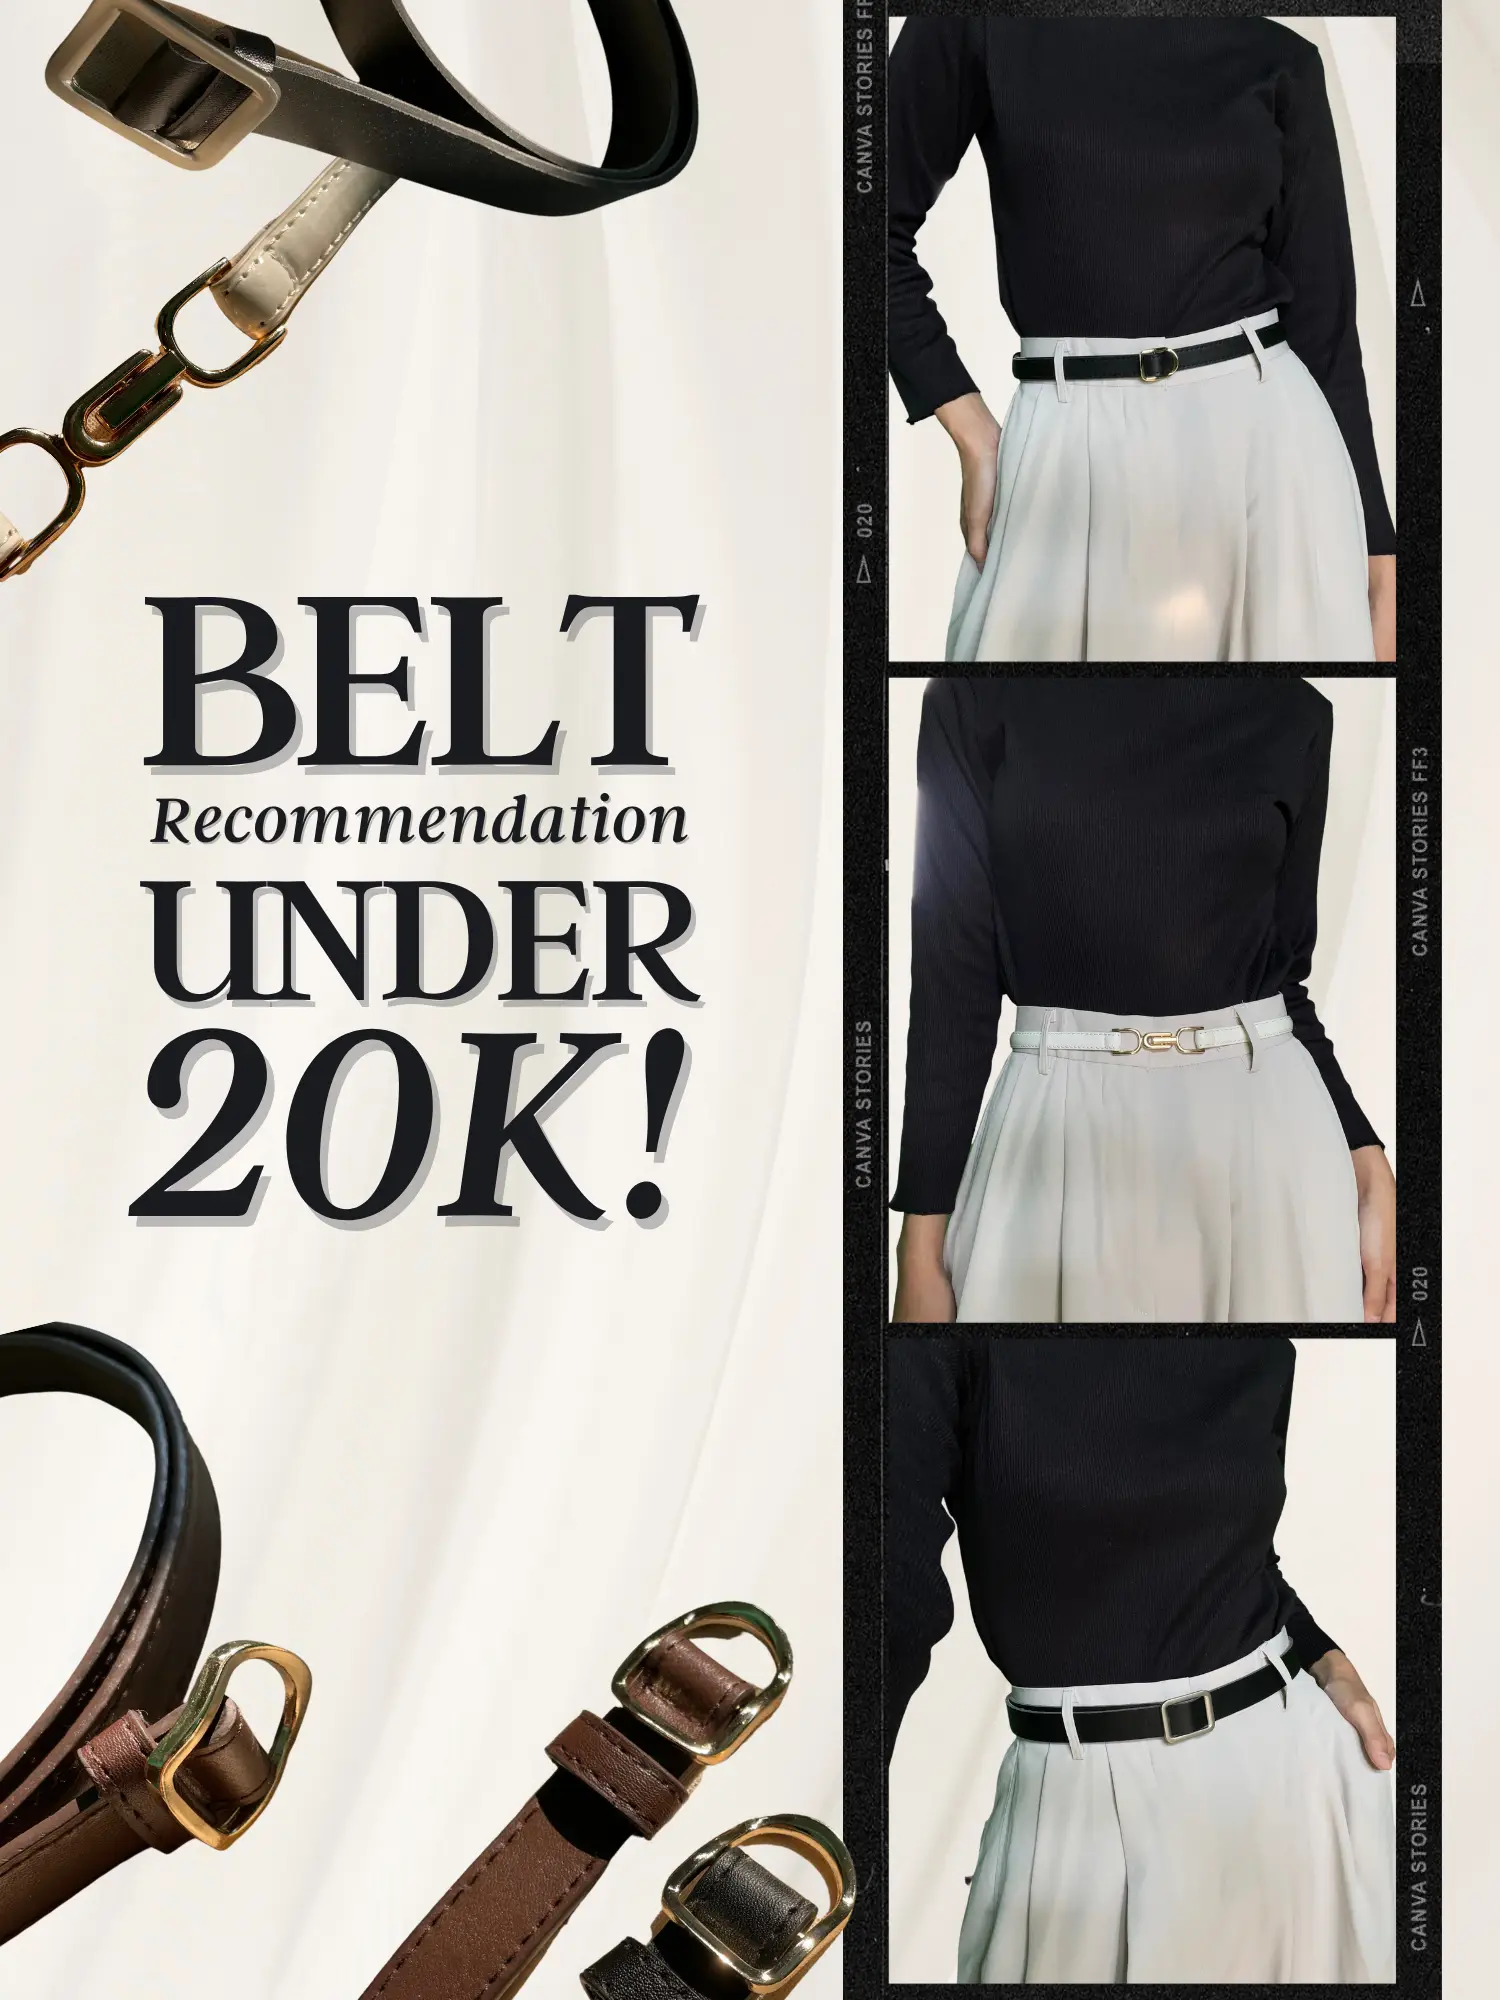 VALENTINO BELT UNBOXING, OUTFIT IDEAS